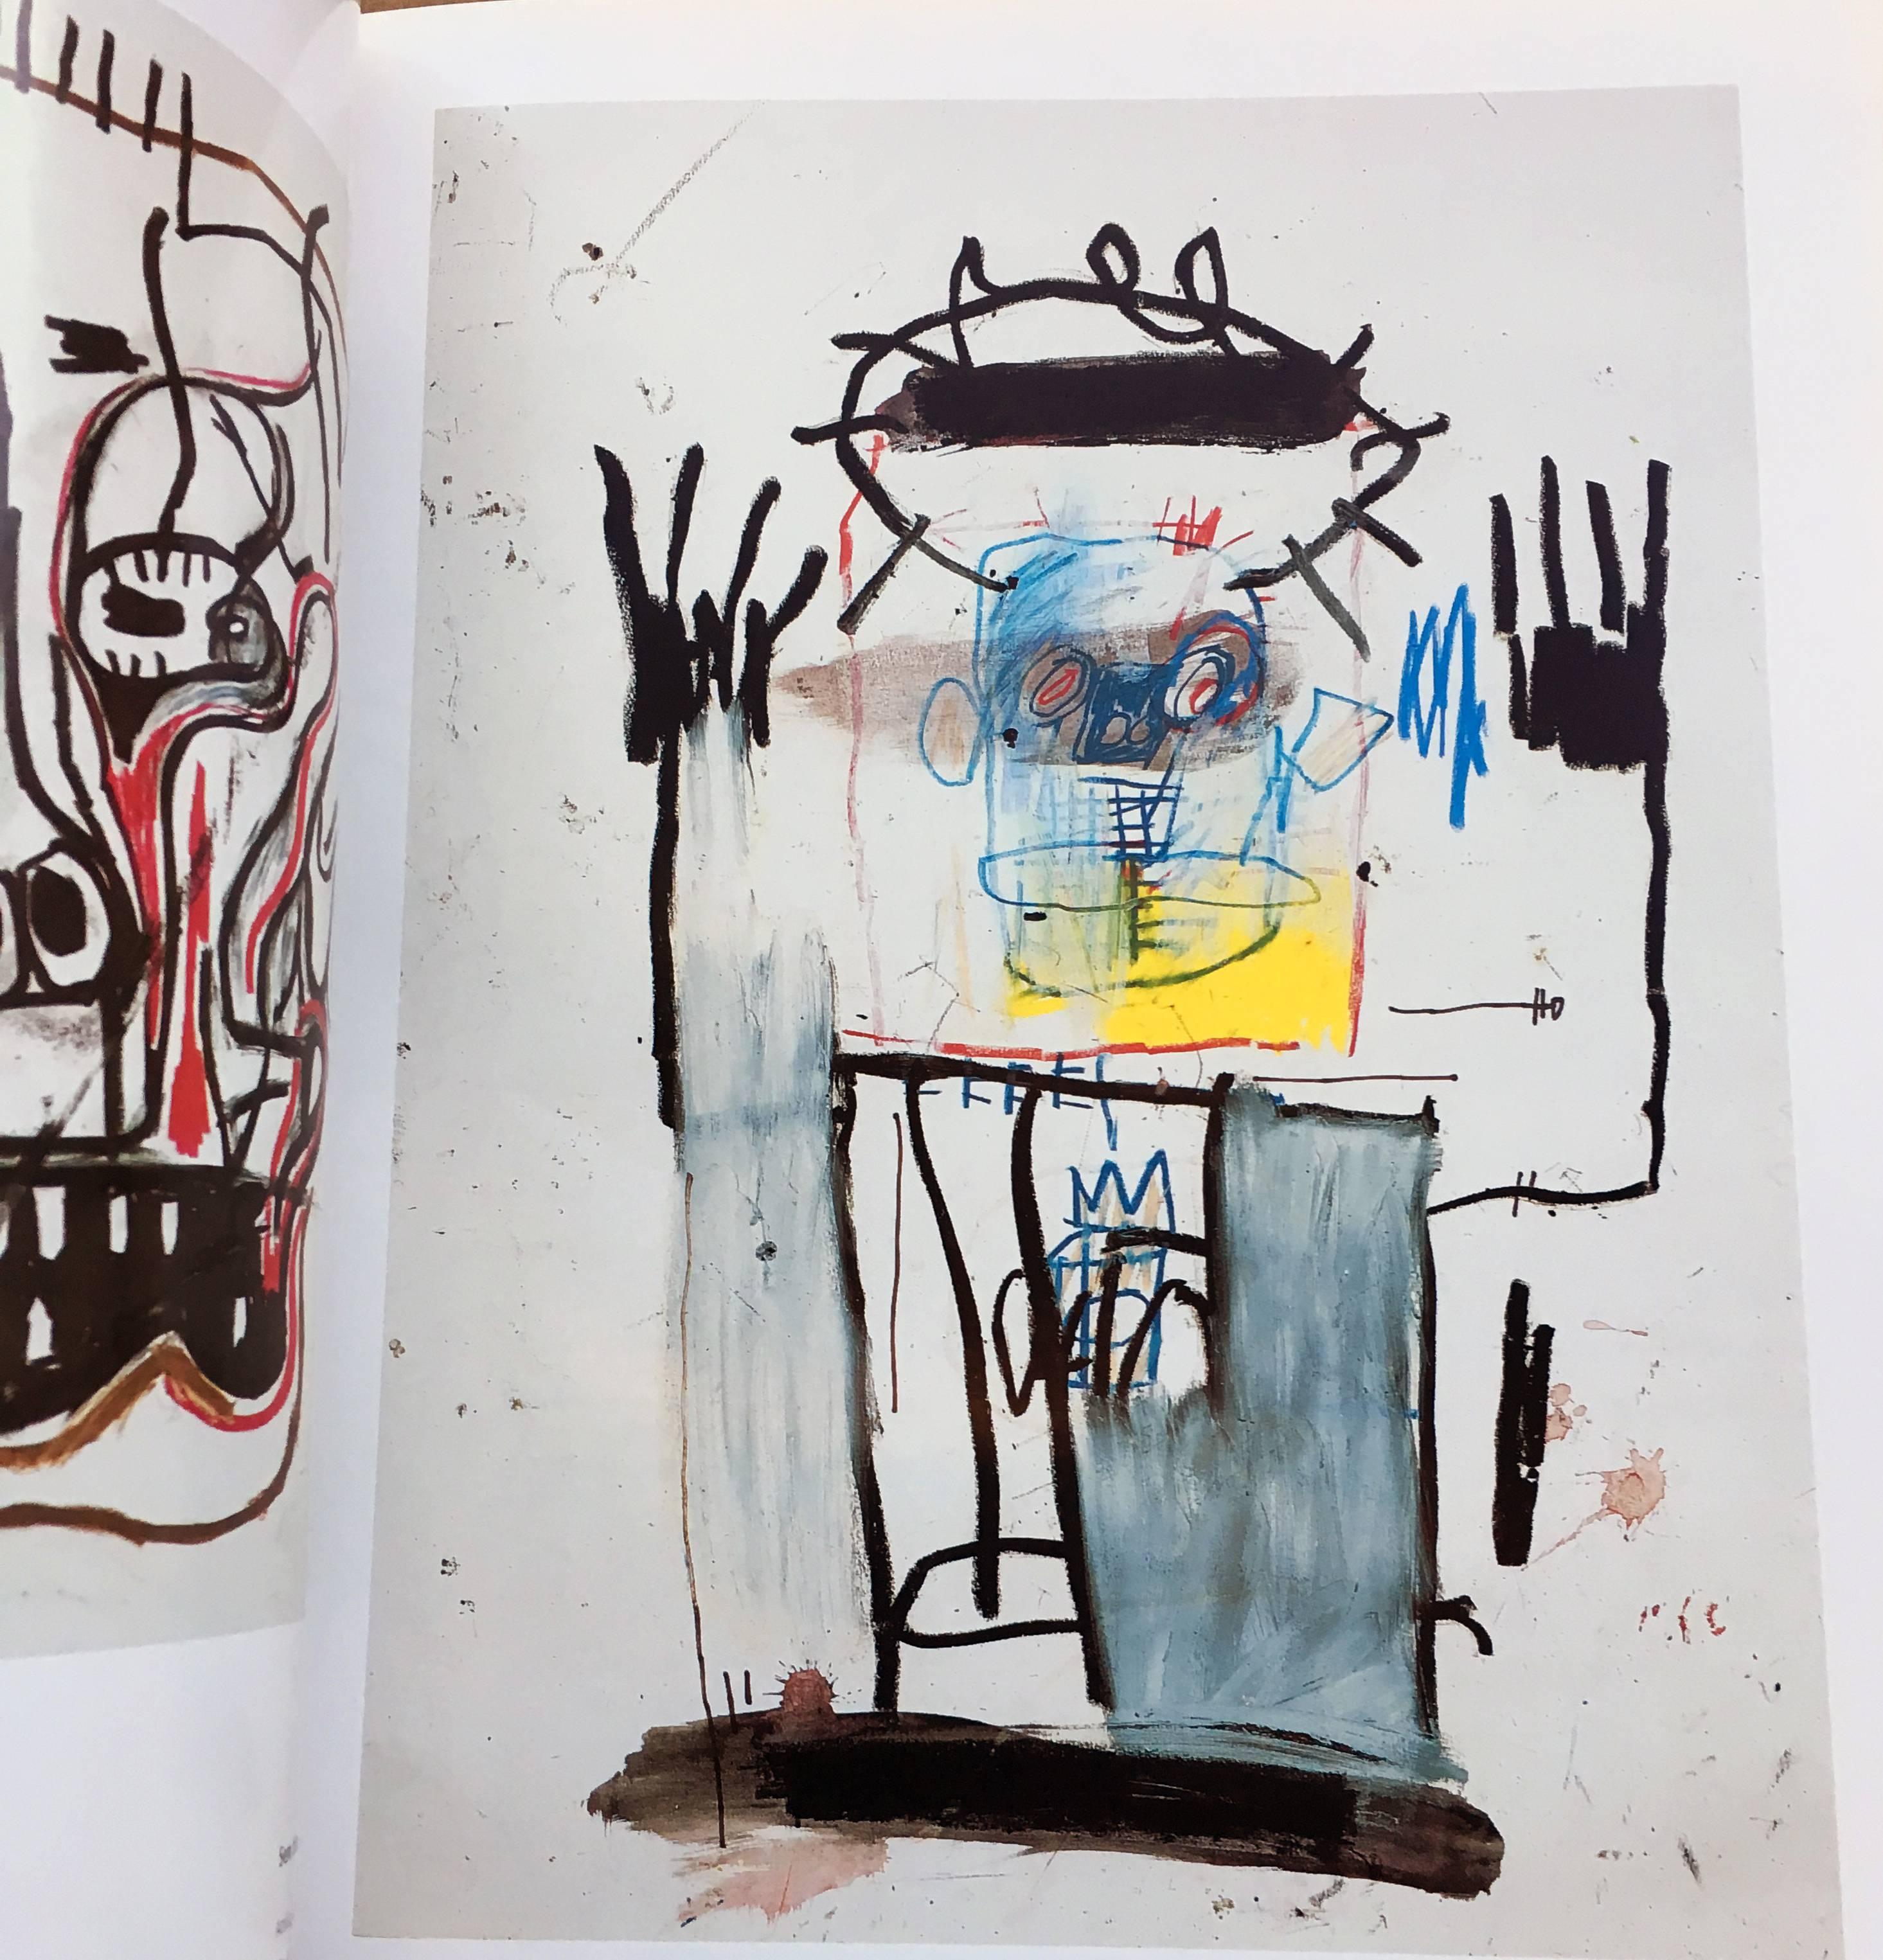 Jean-Michel Basquiat: obras sobre papeis (Galerie Enrico Navarra, 1998) 
This is an extremely rare catalog which features a comprehensive survey of Basquiat works on paper beautifully illustrated in color; featuring a 3 image front cover folding